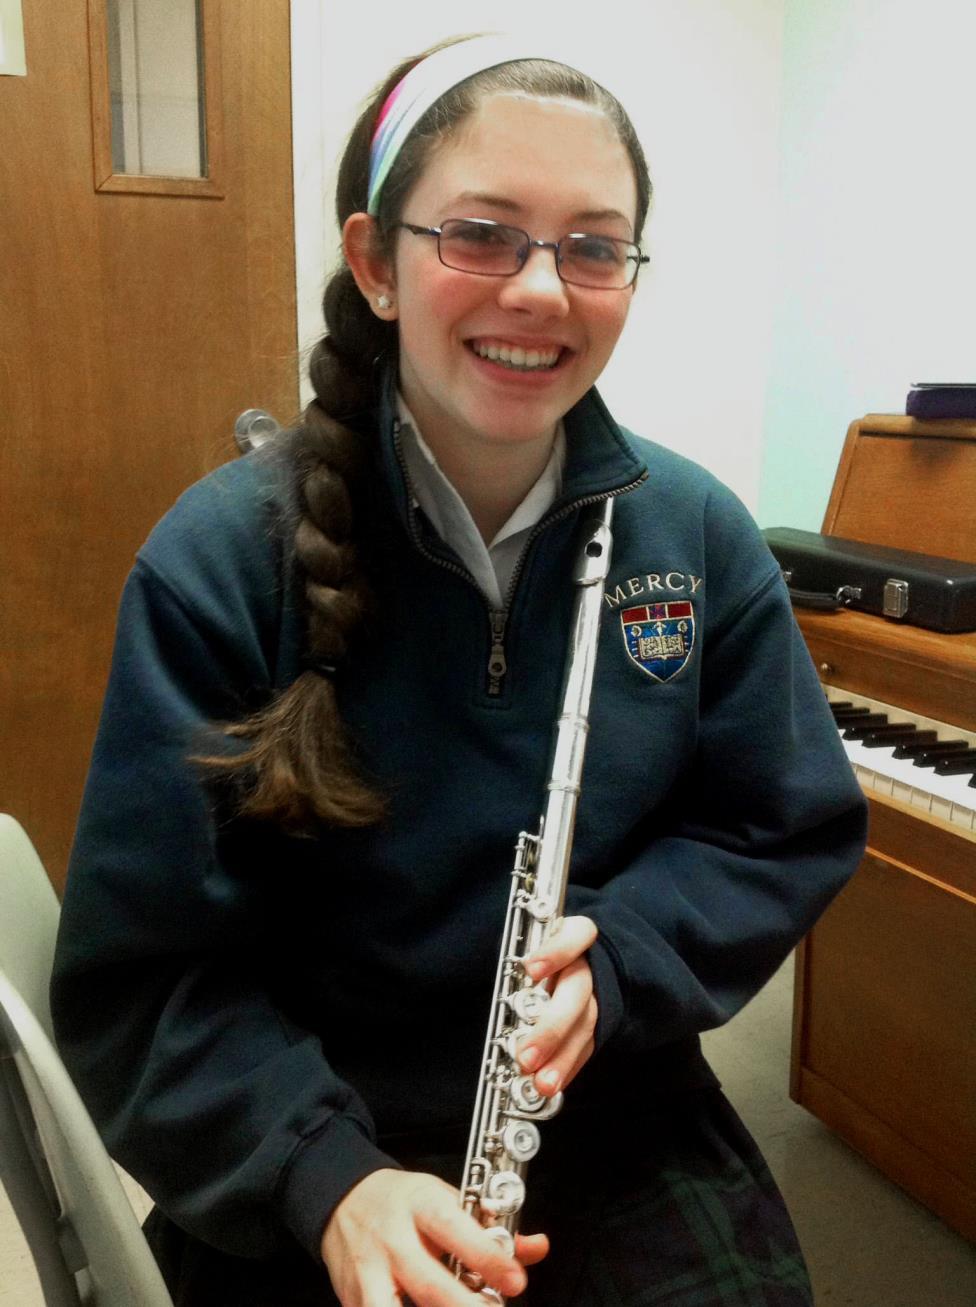 Elise Scarchilli is immersed in music; she plays flute in Mercy's orchestra and in the Royal Oak High School marching band, competes in music festivals, and is an avid pianist.